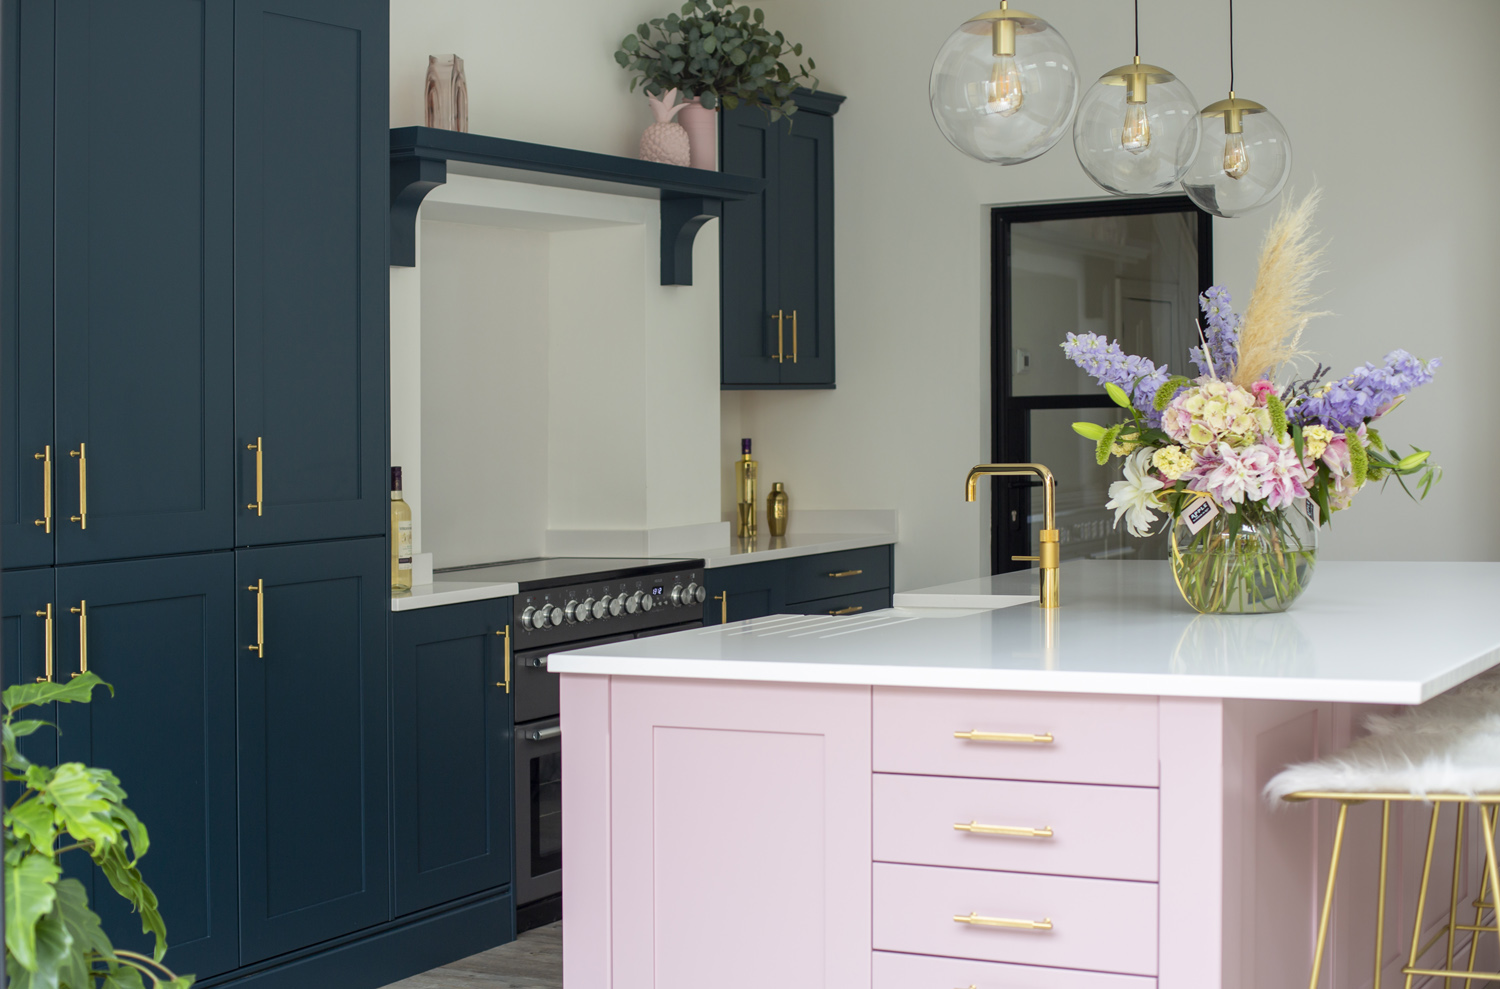 Stoneham Kitchen with a dusky pink kitchen island, dark blue cabinetry and gold lights and accessories